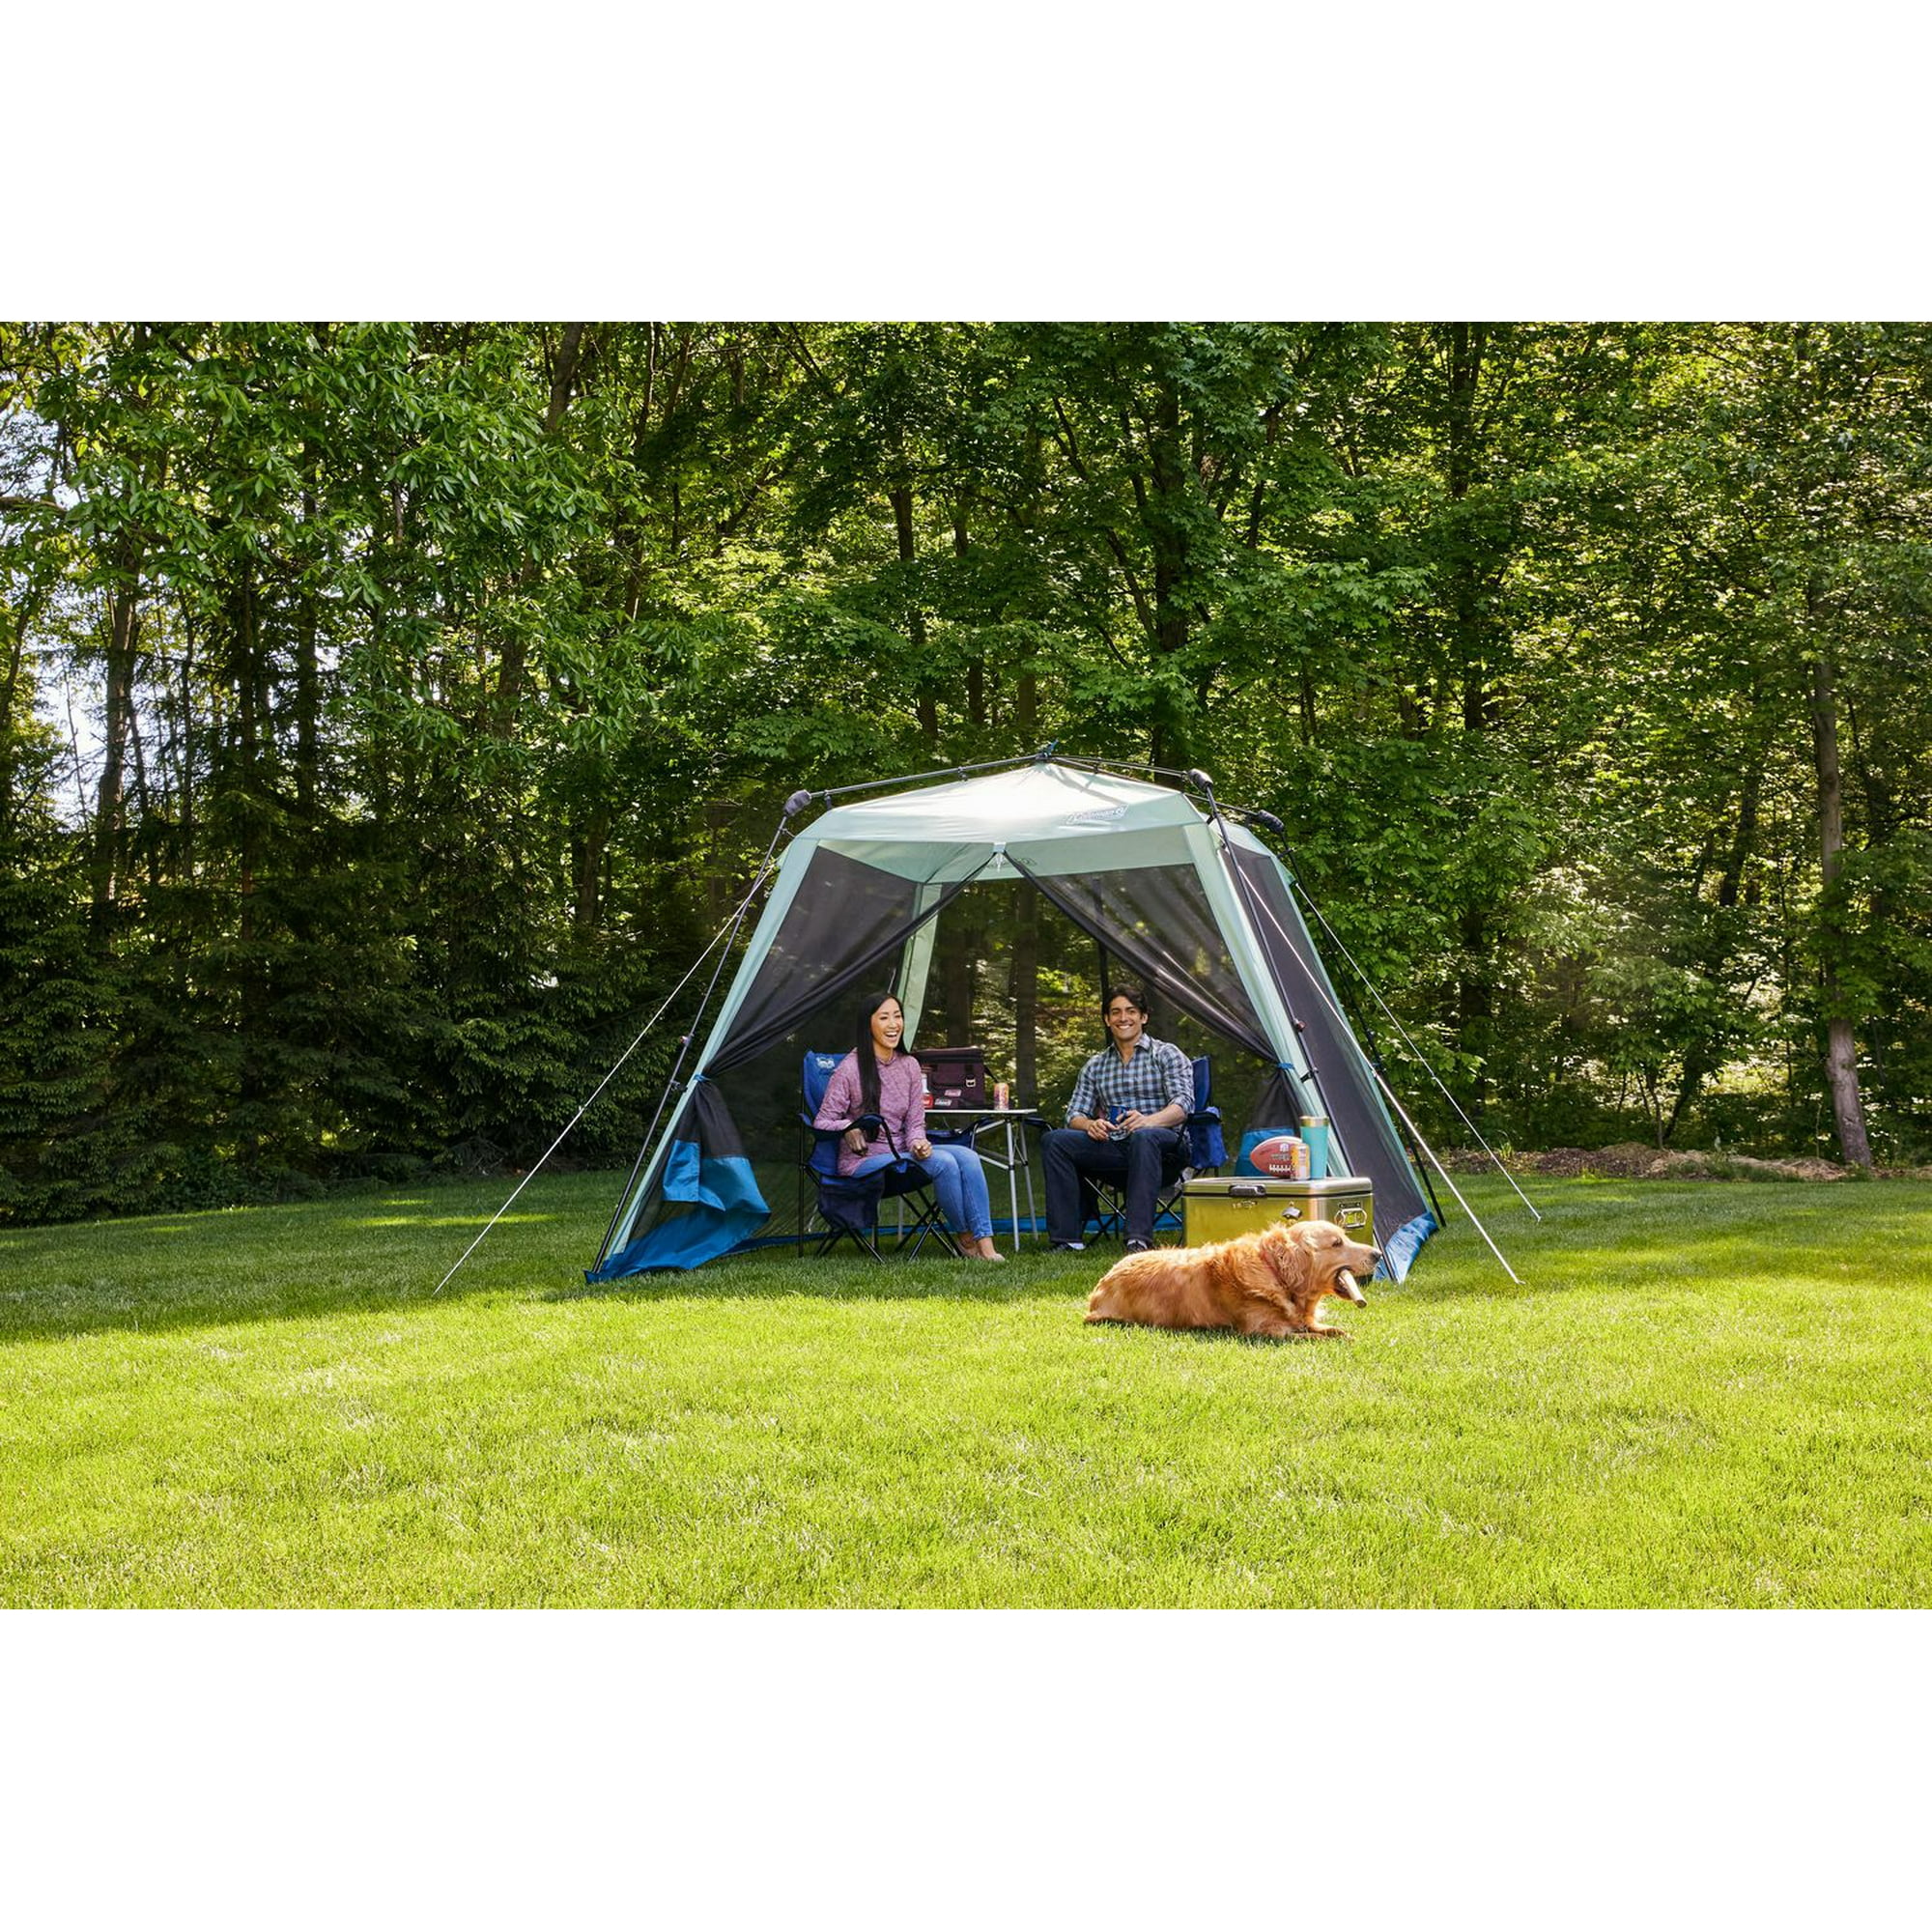 Coleman Skylodge 10-Person Instant Camping Tent w/Screen Room - Blue Nights  [2149570]